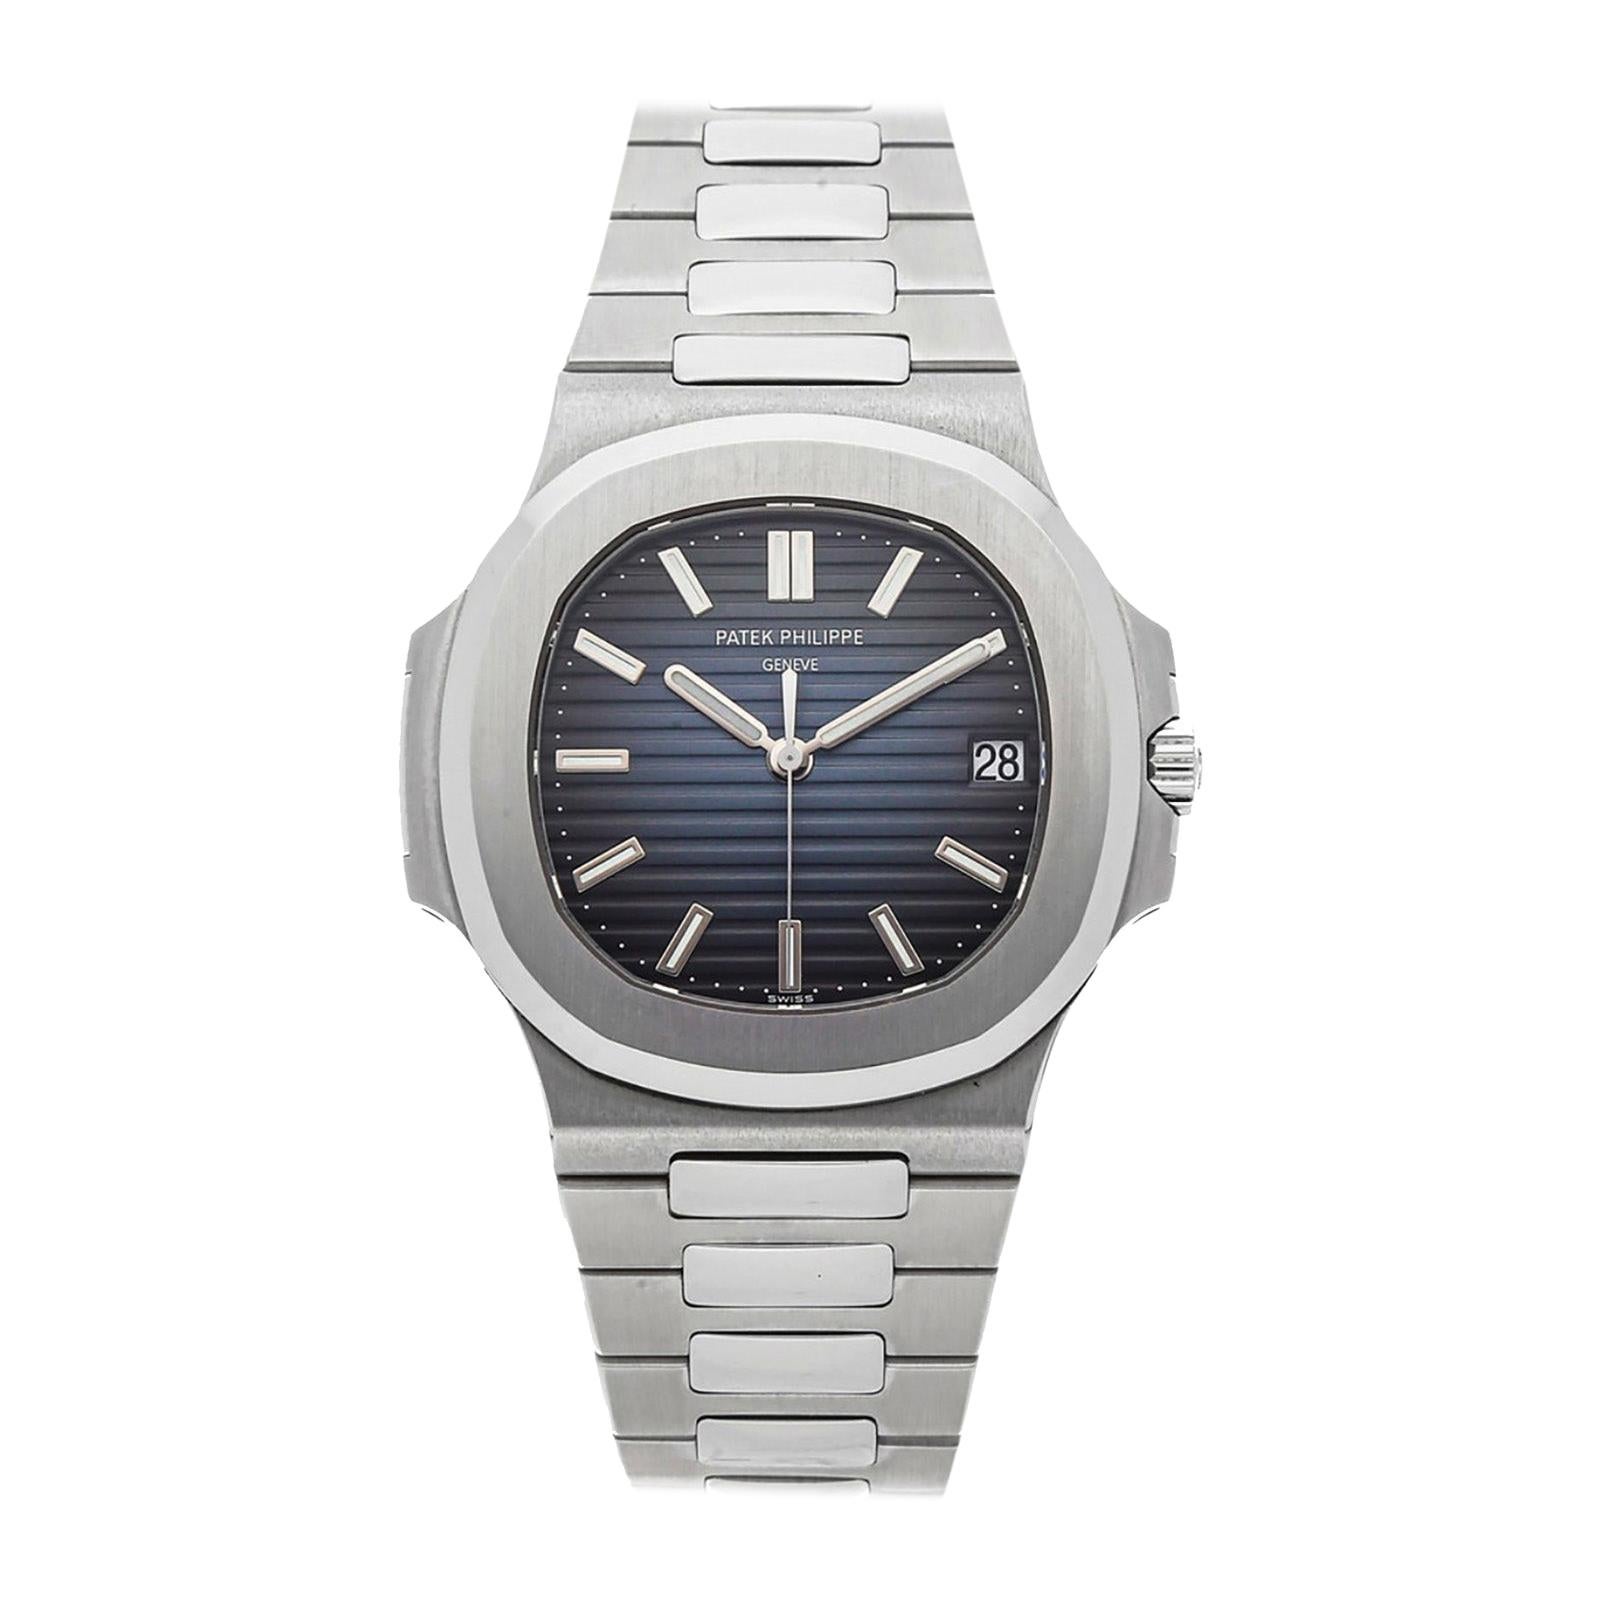 Patek Philippe Nautilus 5711/1A-010 Blue Dial Stainless Box and Papers 'P-38'